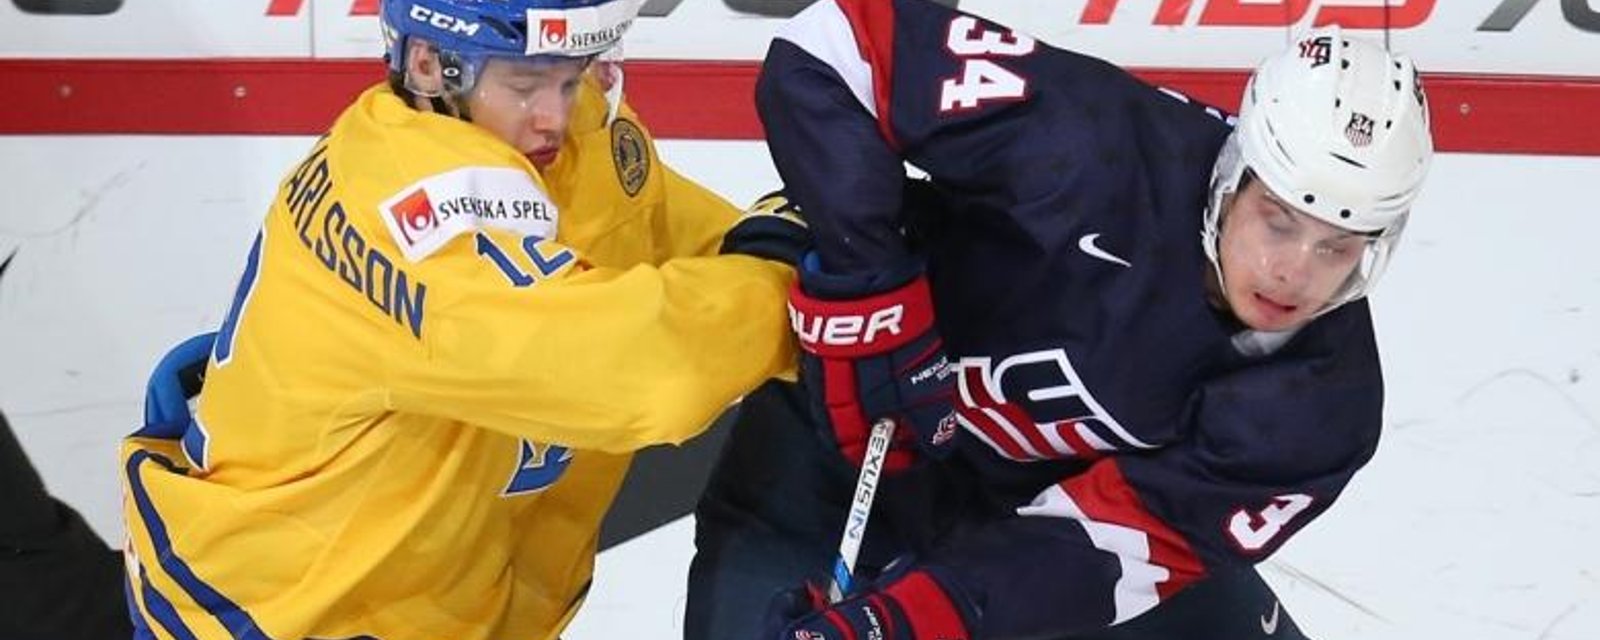 Projected 1st overall pick Matthews shows his skills at World Championship.